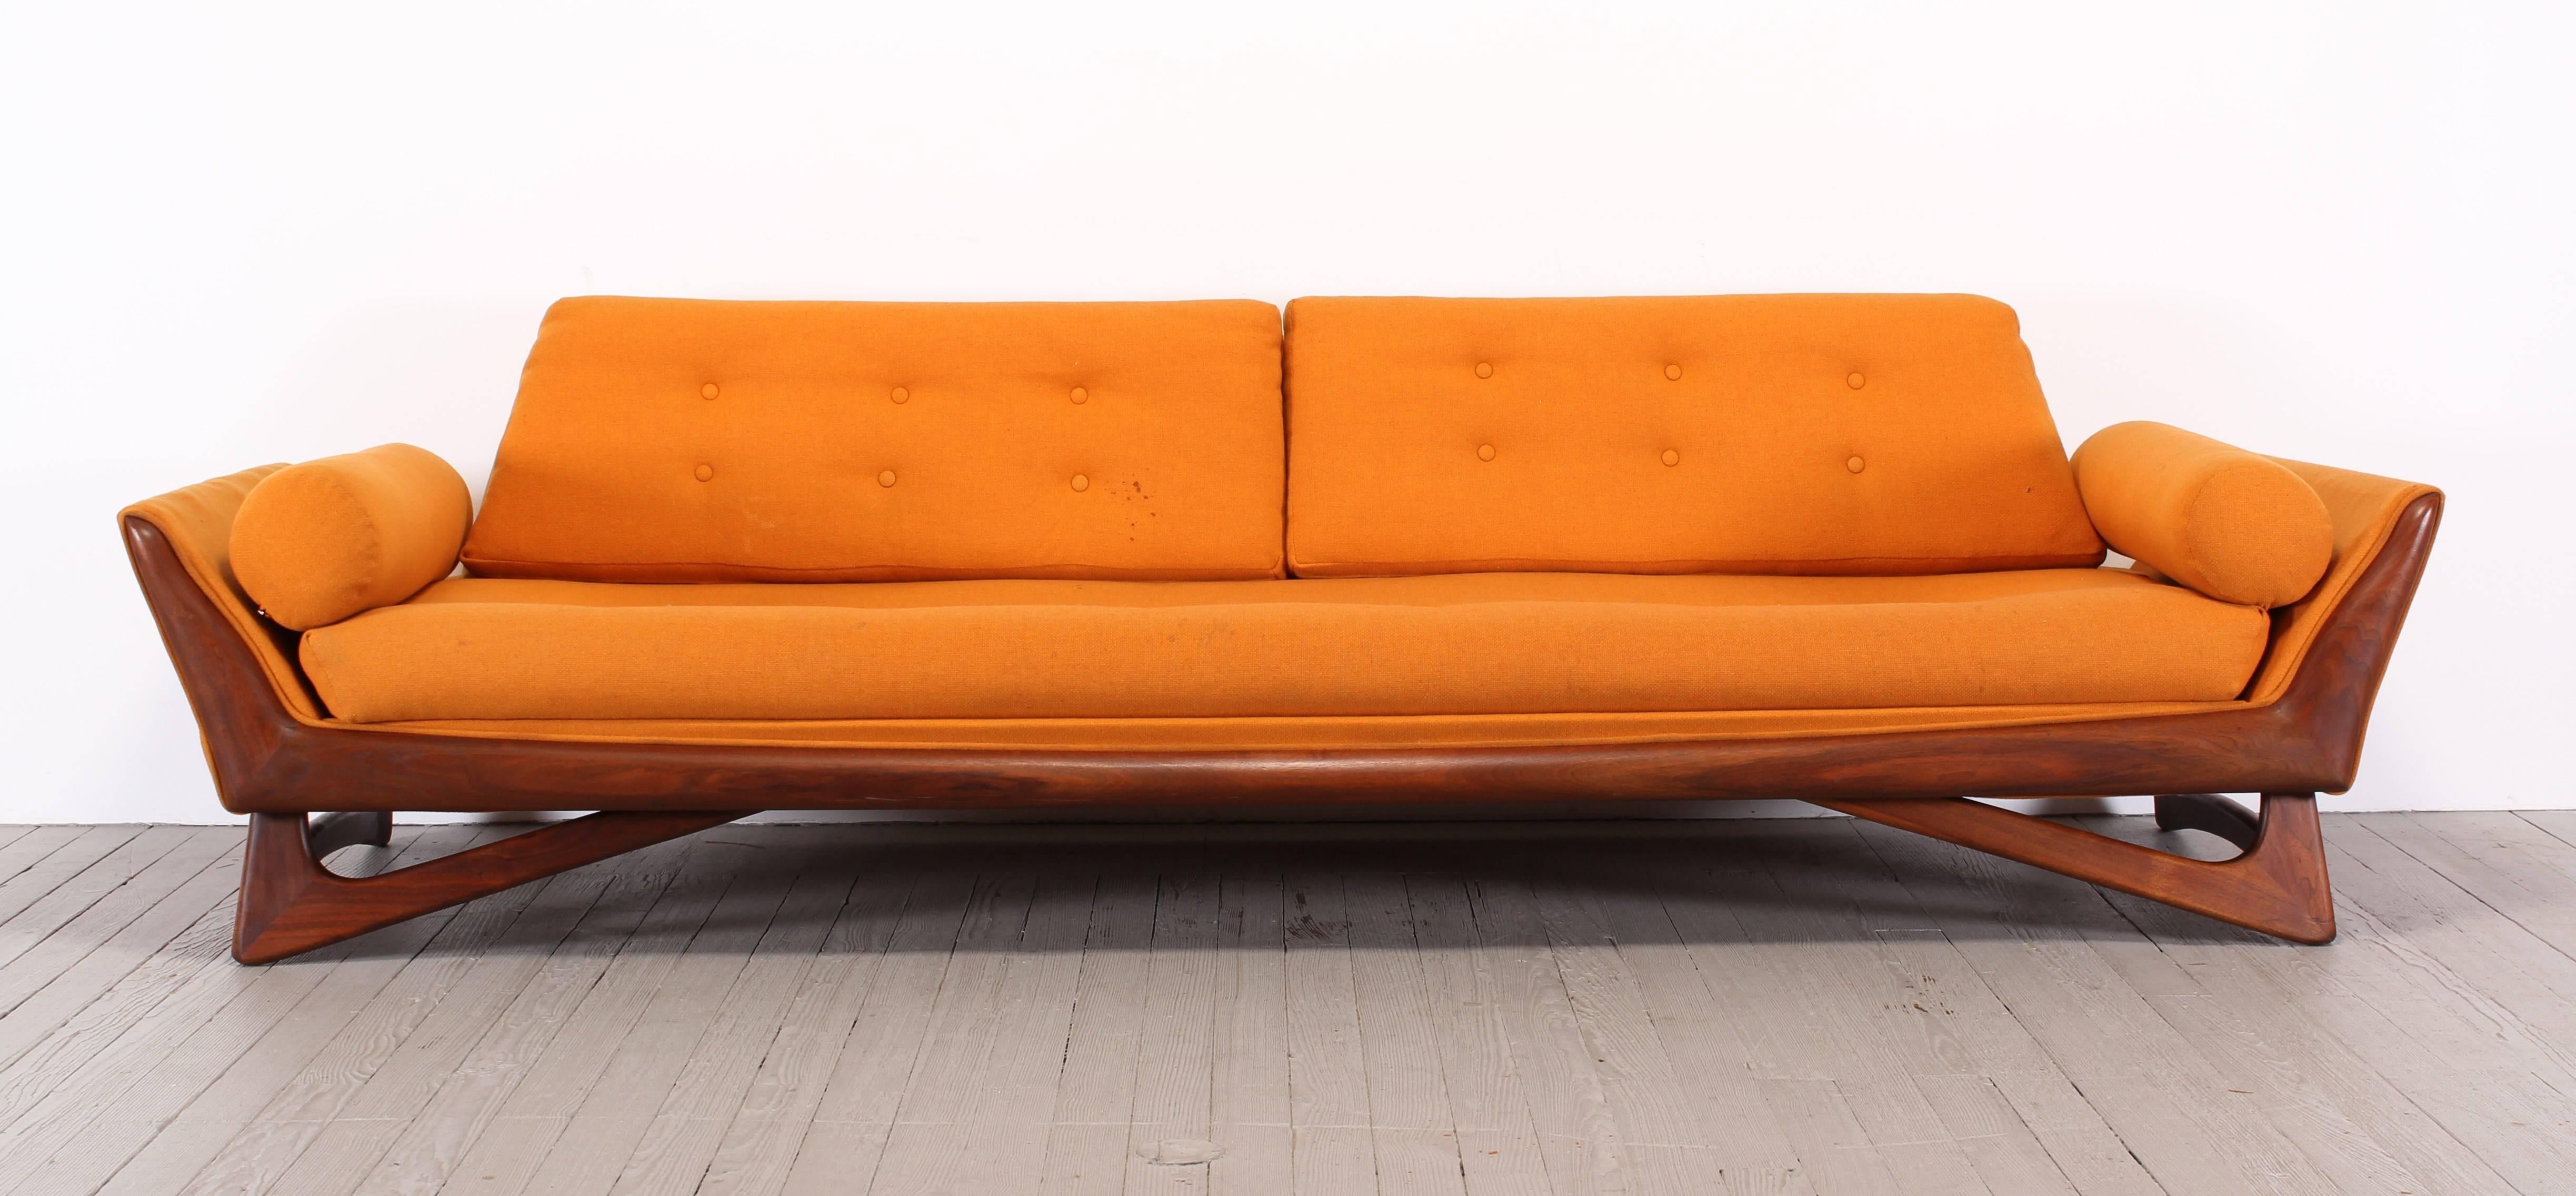 A sculptural Adrian Pearsall sofa for Craft Associates, 1960. This is an unusual model with walnut base. New upholstery necessary. Some joints are loose which is normal age appropriate wear from usage. Can be glued upon re-upholstery. Seat depth